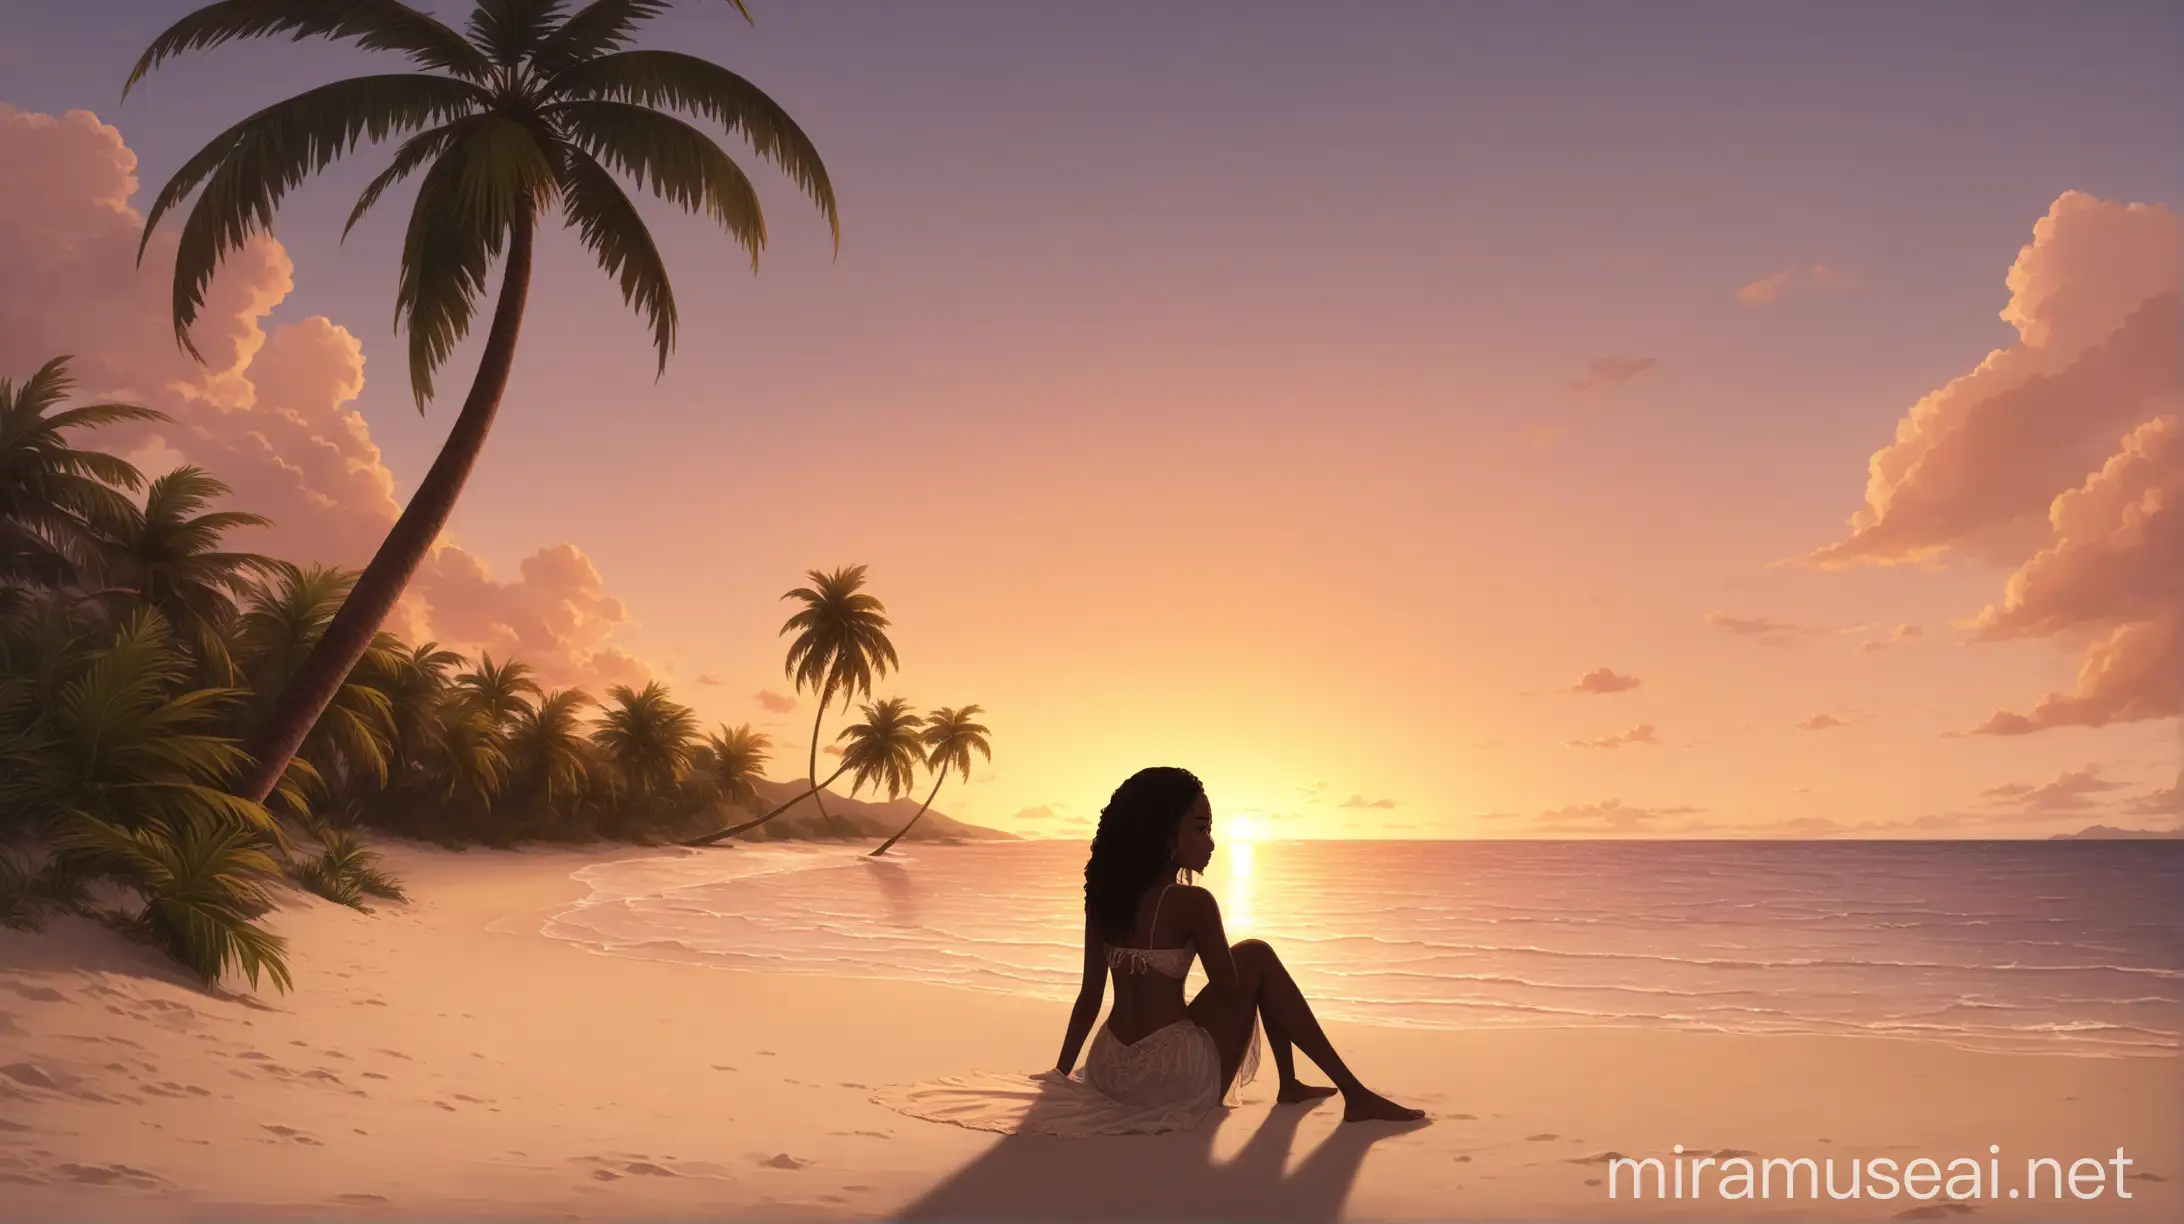 A caribbean girl chilling sitted on the sand of a beach with at her left some palms tree and the water on the right with a sunset